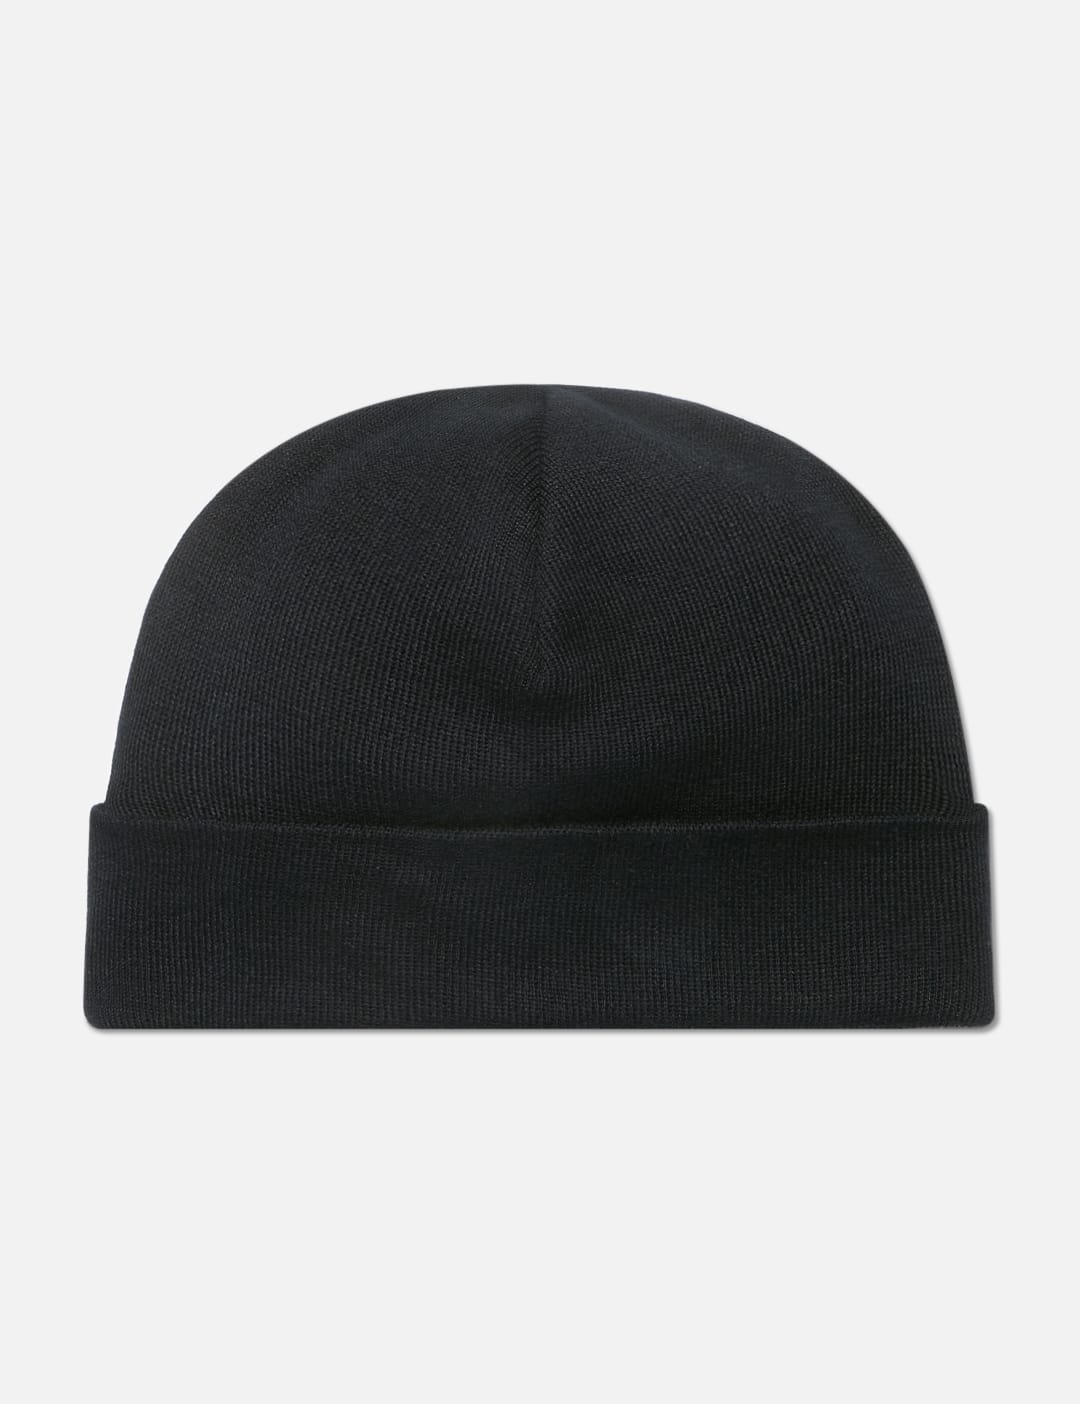 Wacko Maria - Knit Watch Cap | HBX - Globally Curated Fashion and